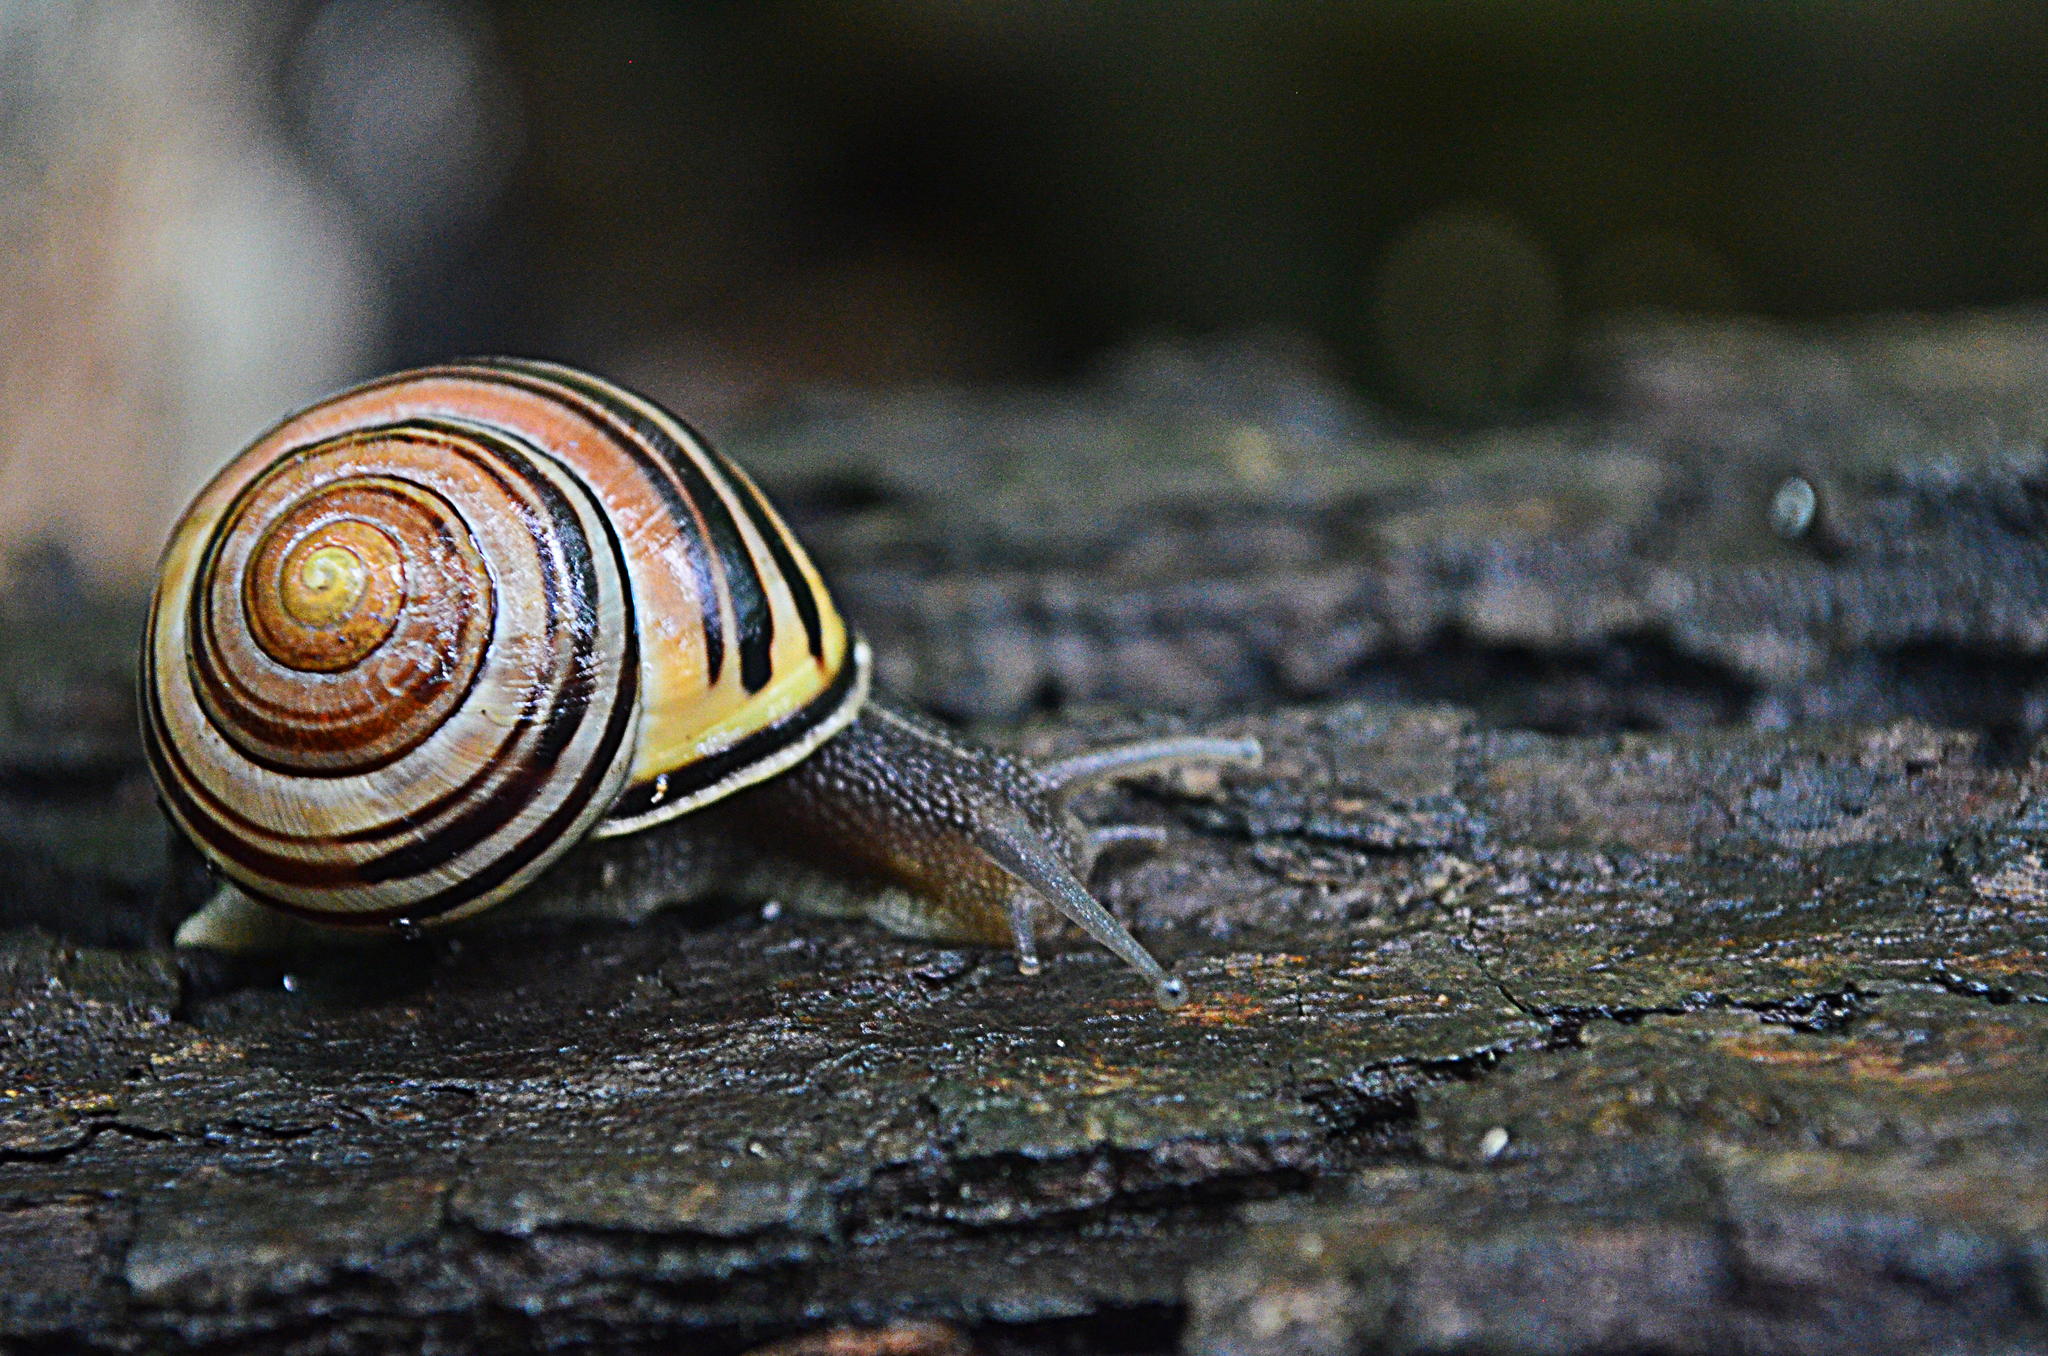 Small Snail by Maddy Fava